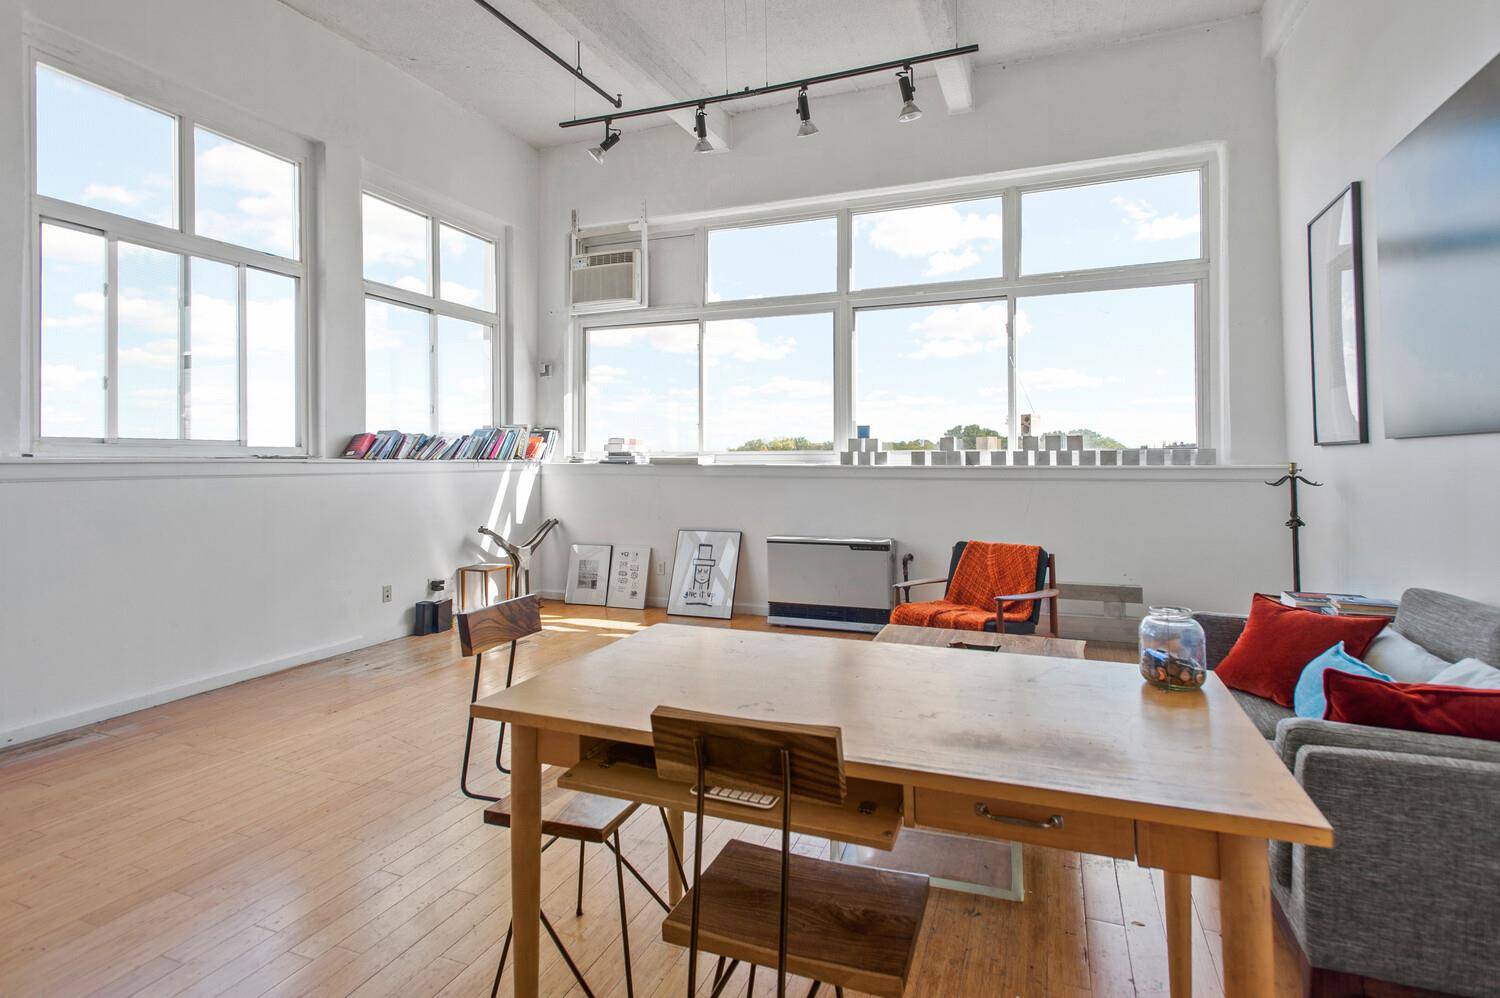 Don't miss this exciting opportunity to craft a dramatic Brooklyn corner penthouse within the bones of an expansive true artist's studio loft in exciting Greenpoint.